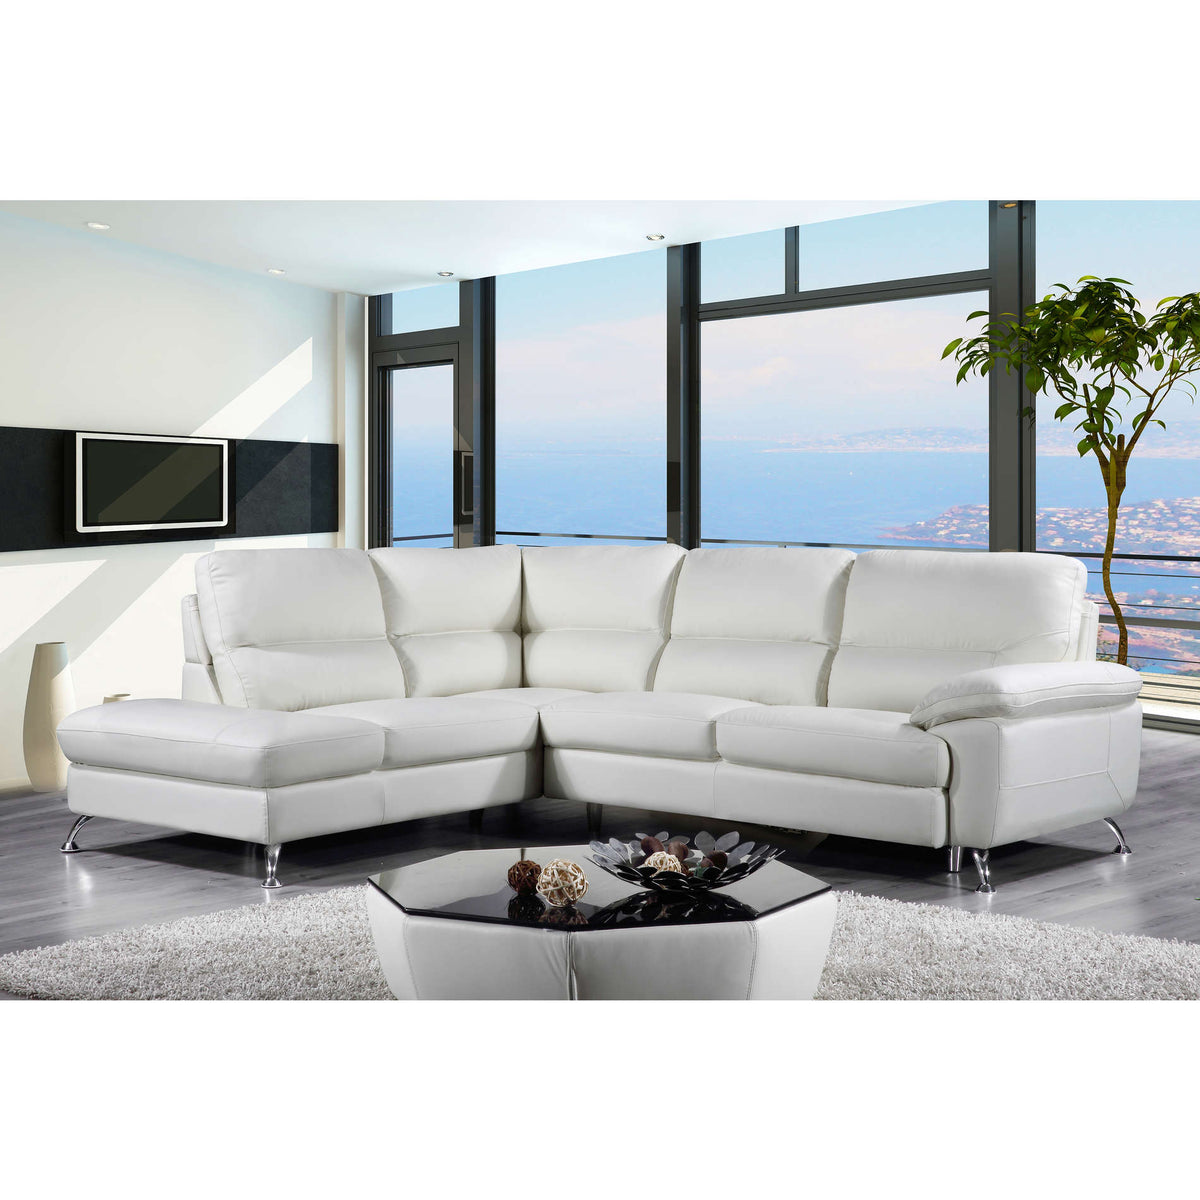 Cortesi Home Contemporary  Miami Genuine Leather Sectional Sofa with Left Facing Chaise Lounge, Off White 80&quot;x98&quot;